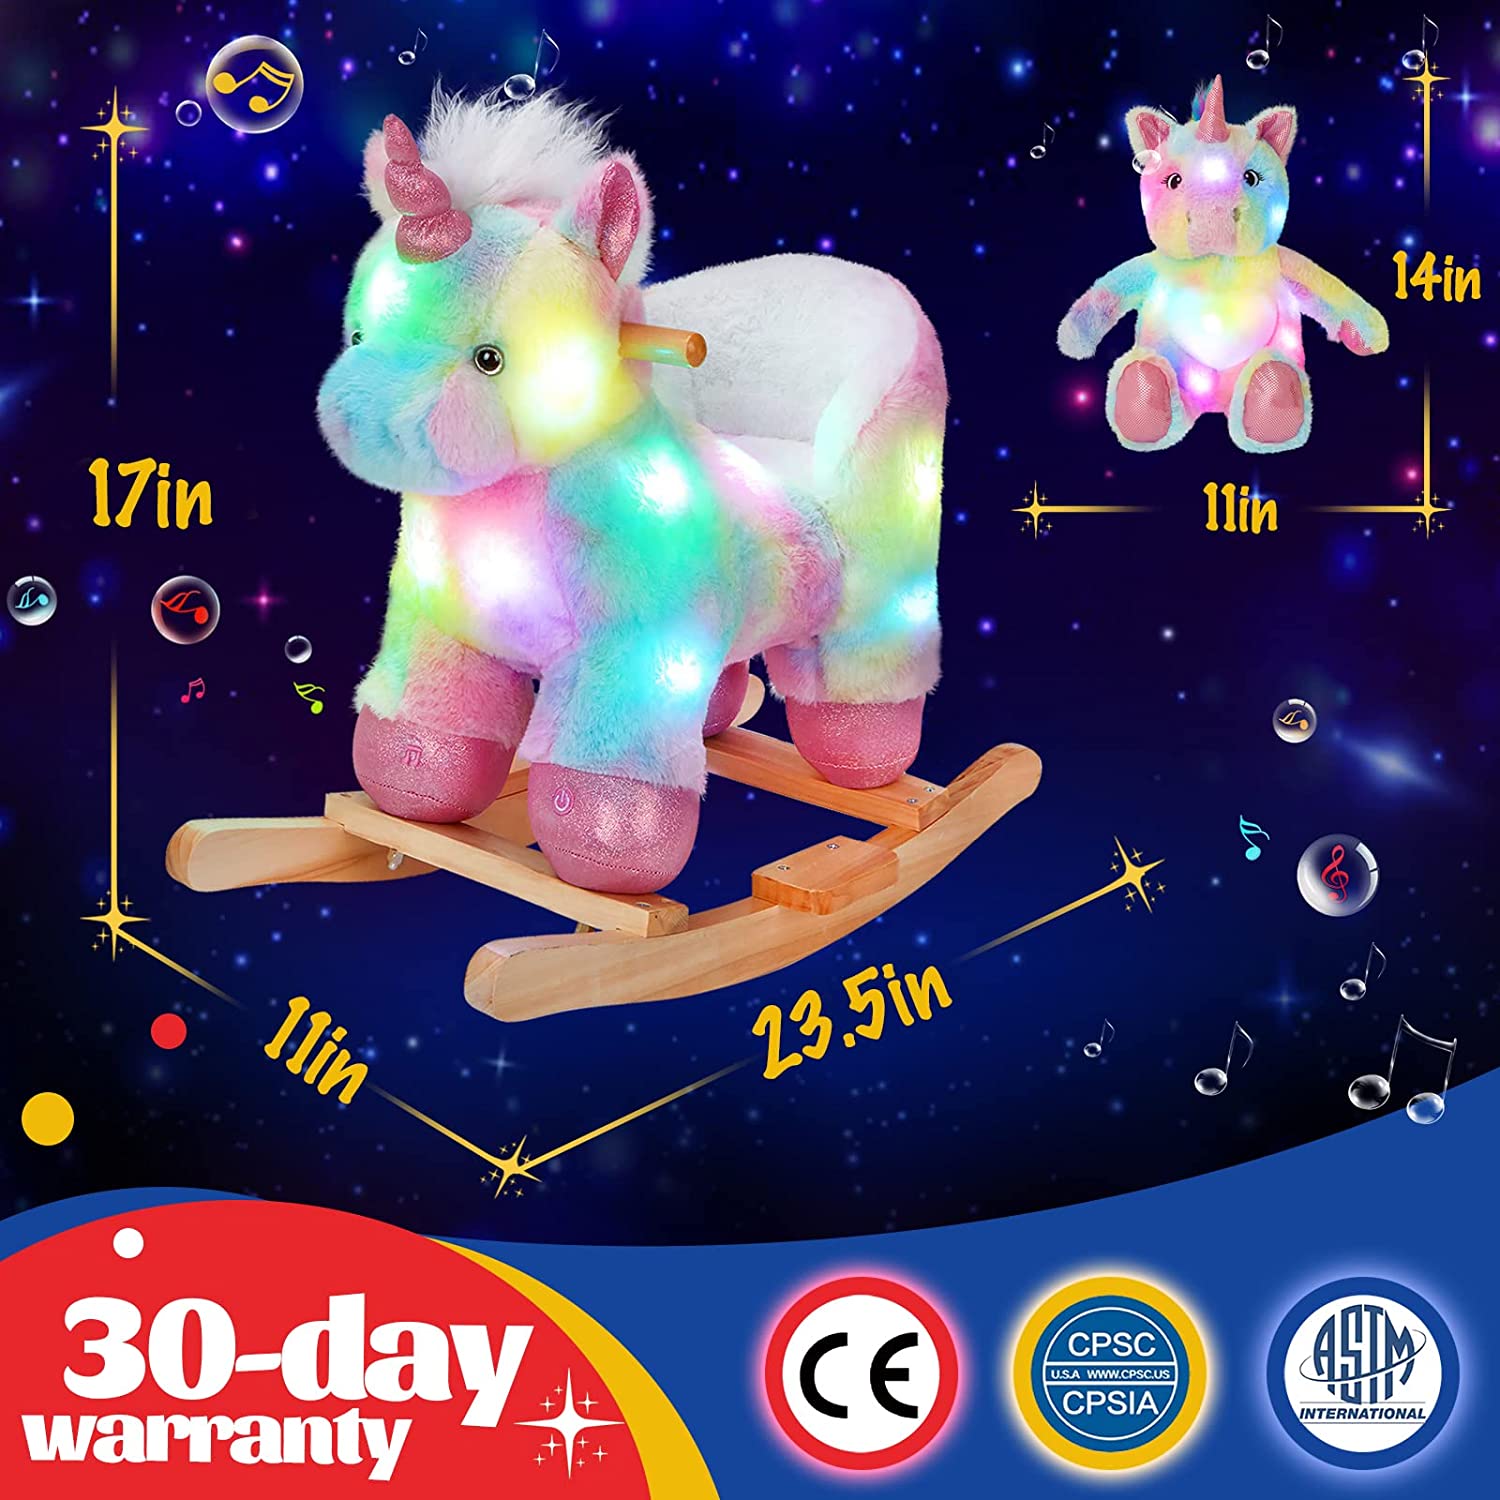 Glow Guards Baby Rocking Horse Plush Stuffed Unicorn Rocker， Musical Light up Wooden Riding Toys for Ages 1-3 Toddlers Kids Babies Ride Toy Gift (Unicorn)